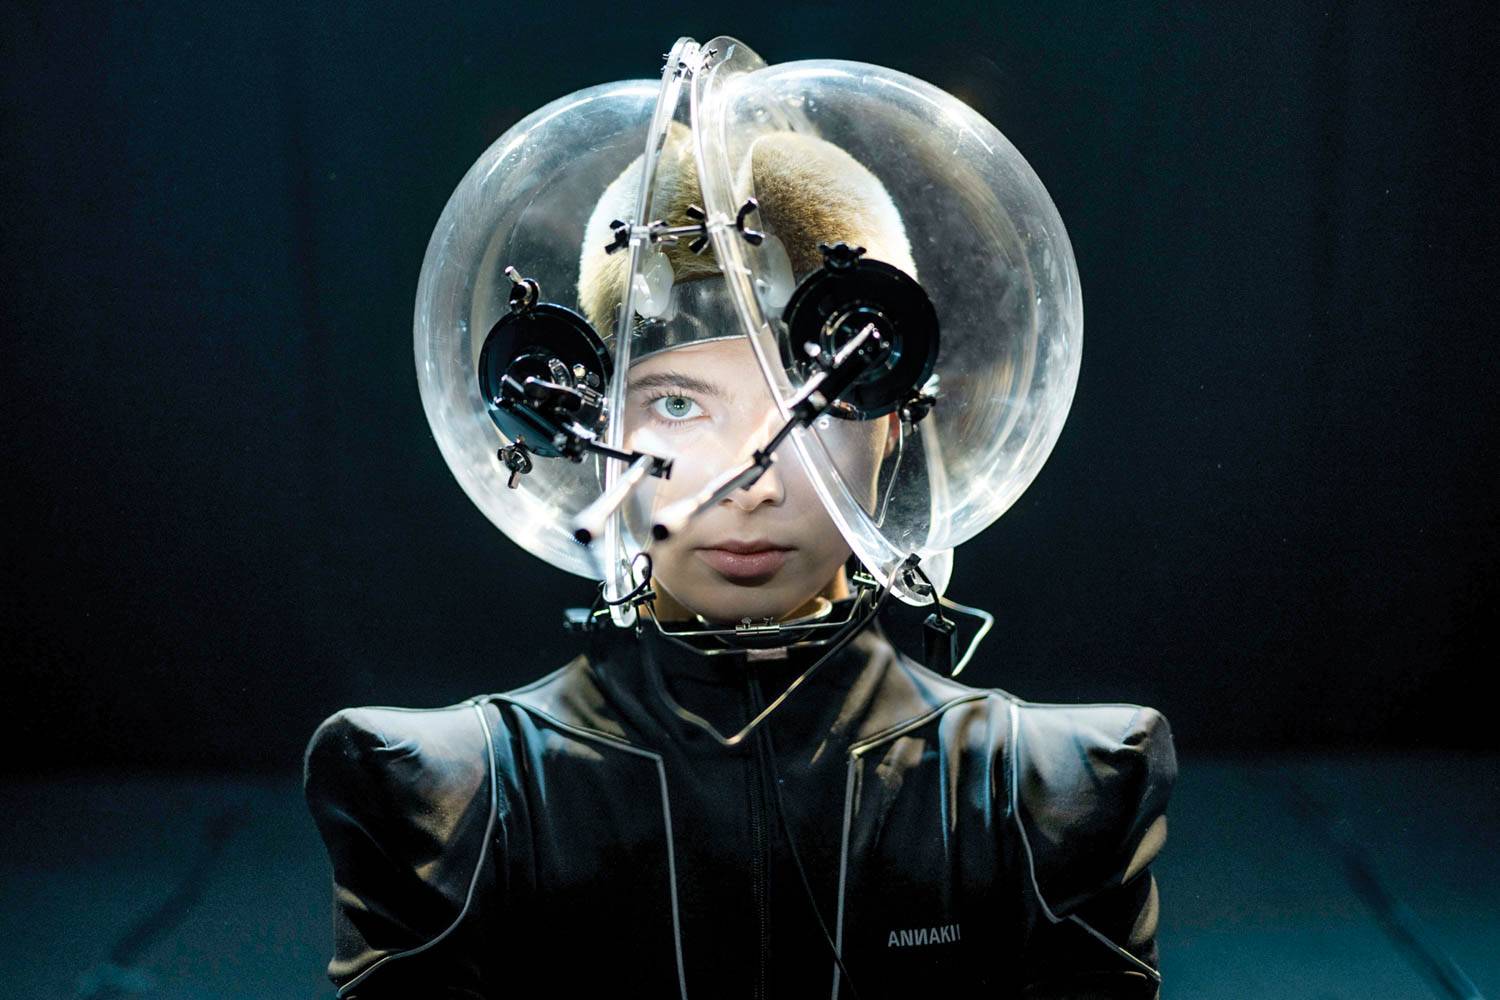 Model wearing an acrylic bubble headpiece fitted with two miniature cameras that captures her eye move­ments